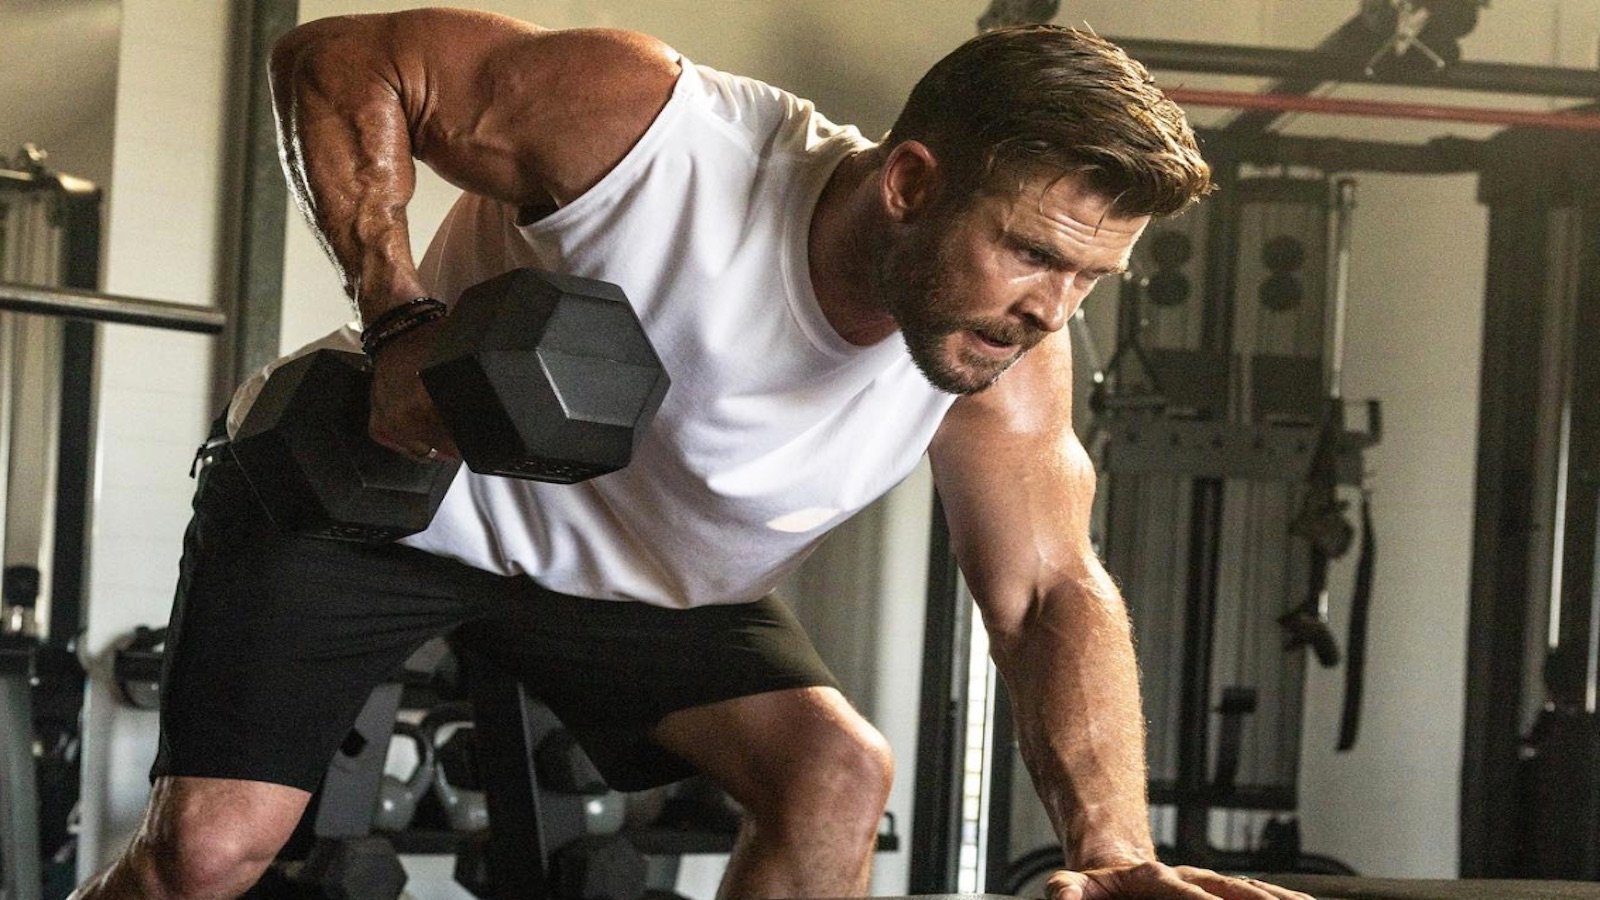 chris-hemsworth-diagrams-a-killer-upper-body-workout-fit-for-an-action-star-–-breaking-muscle